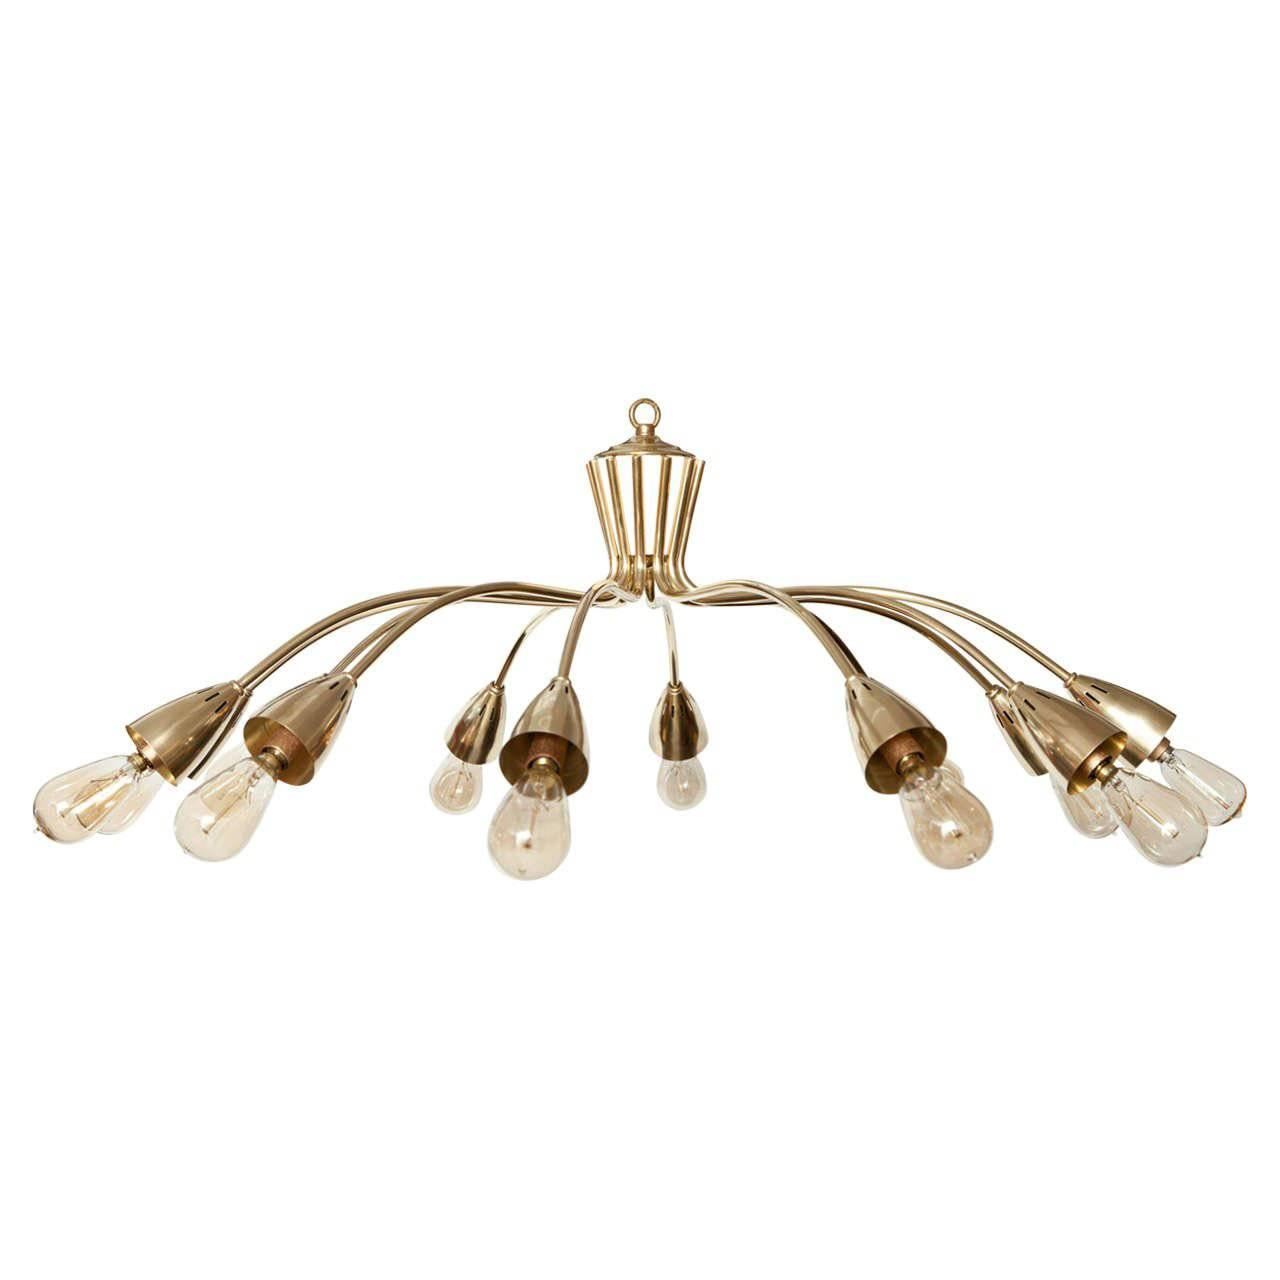 Chandelier, Brass, Italy, 12 Arms, C 1950